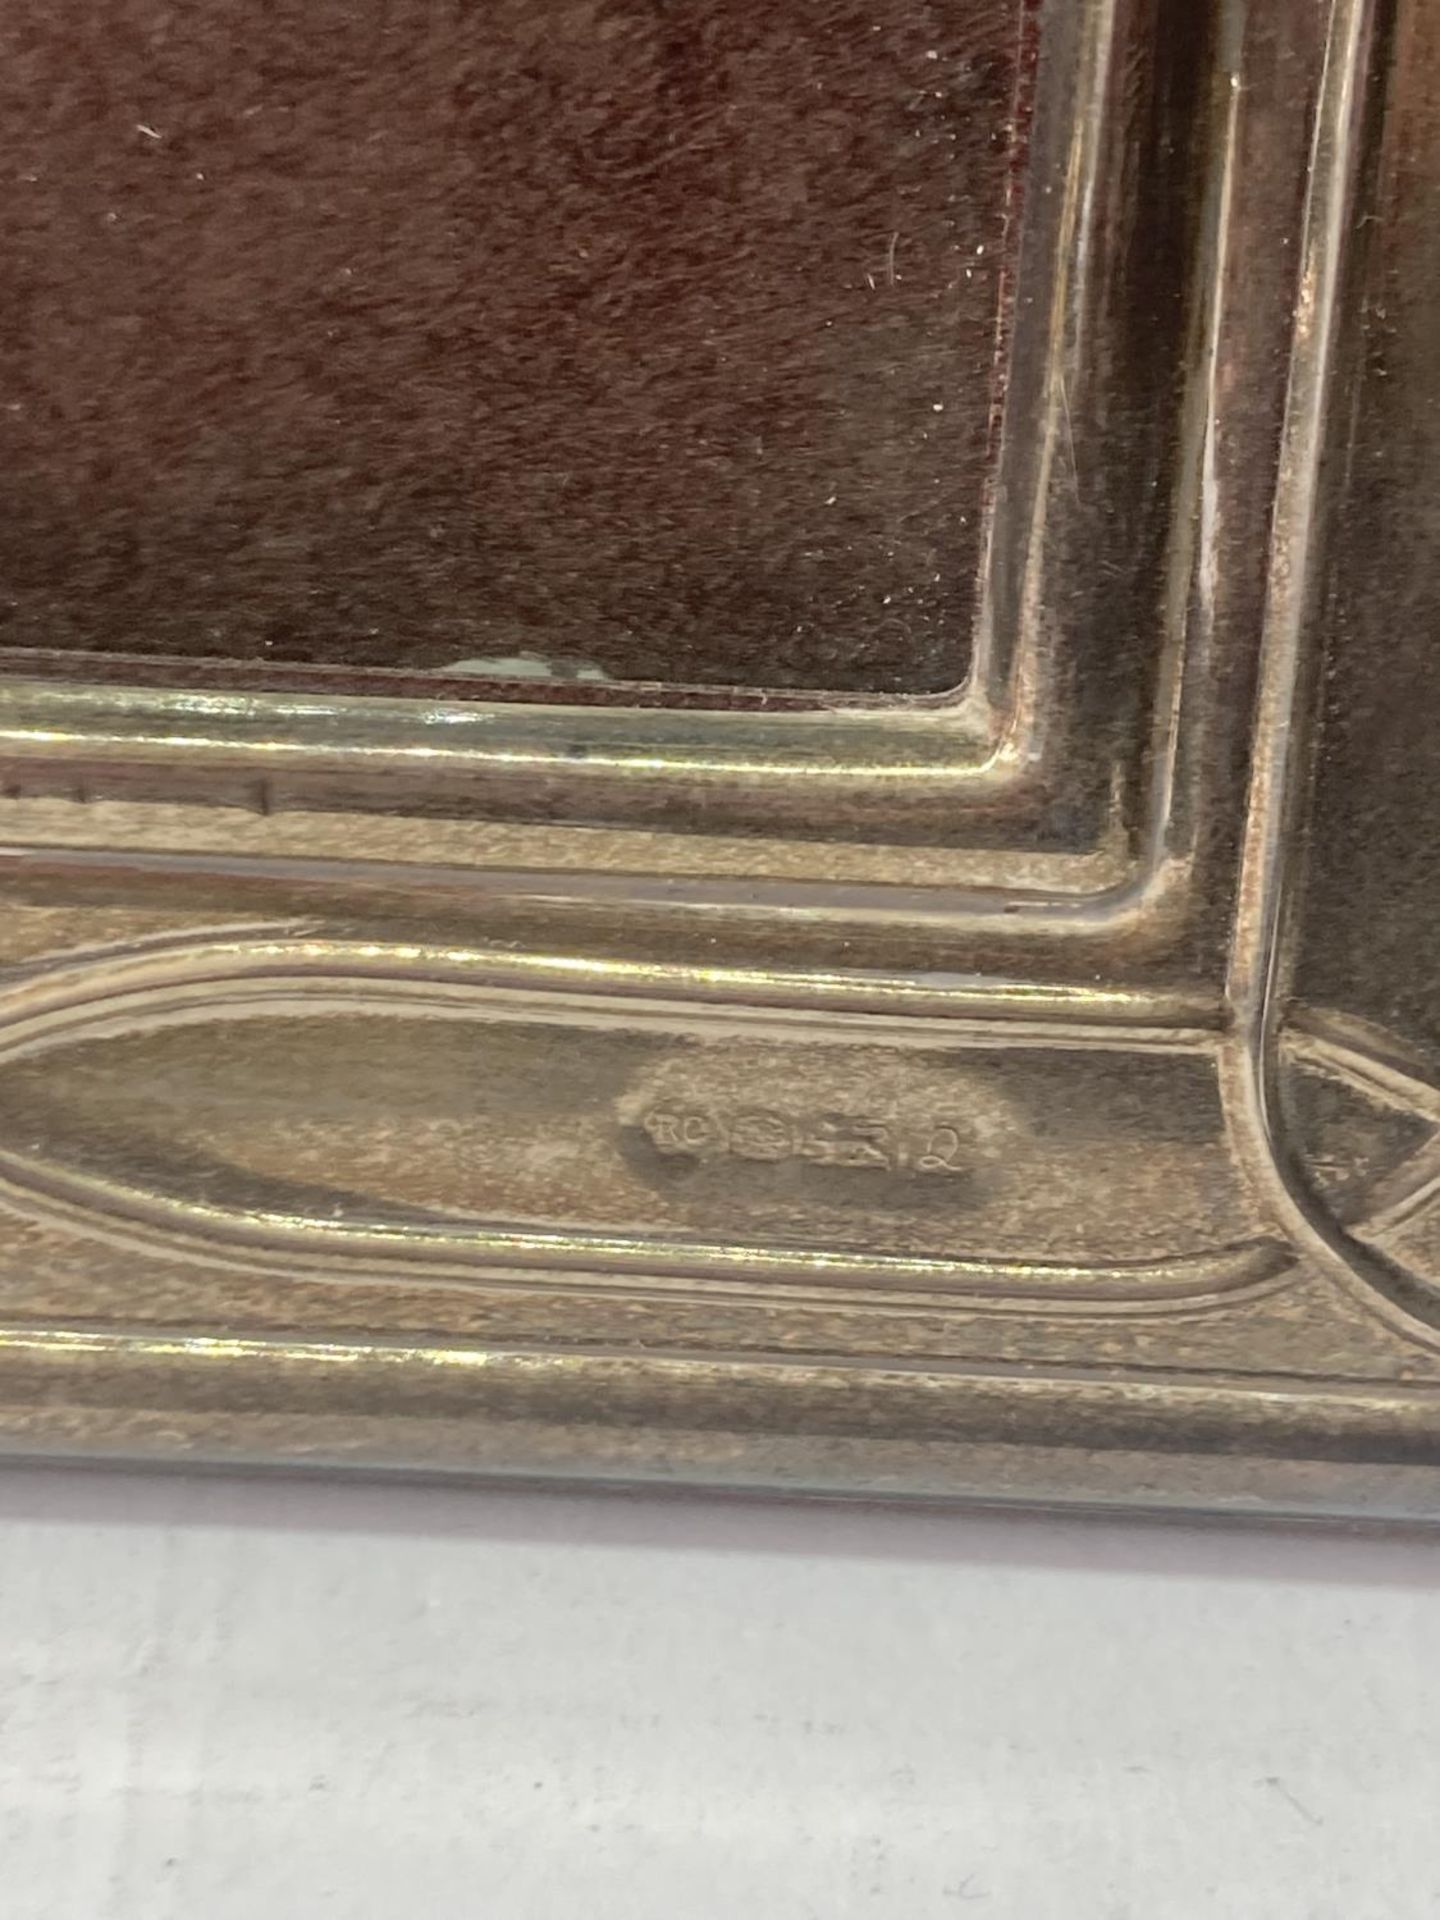 A HALLMARKED SHEFFIELD SILVER PHOTOGRAPH FRAME TO HOLD A 3.5" X 5" PICTURE - Image 3 of 8